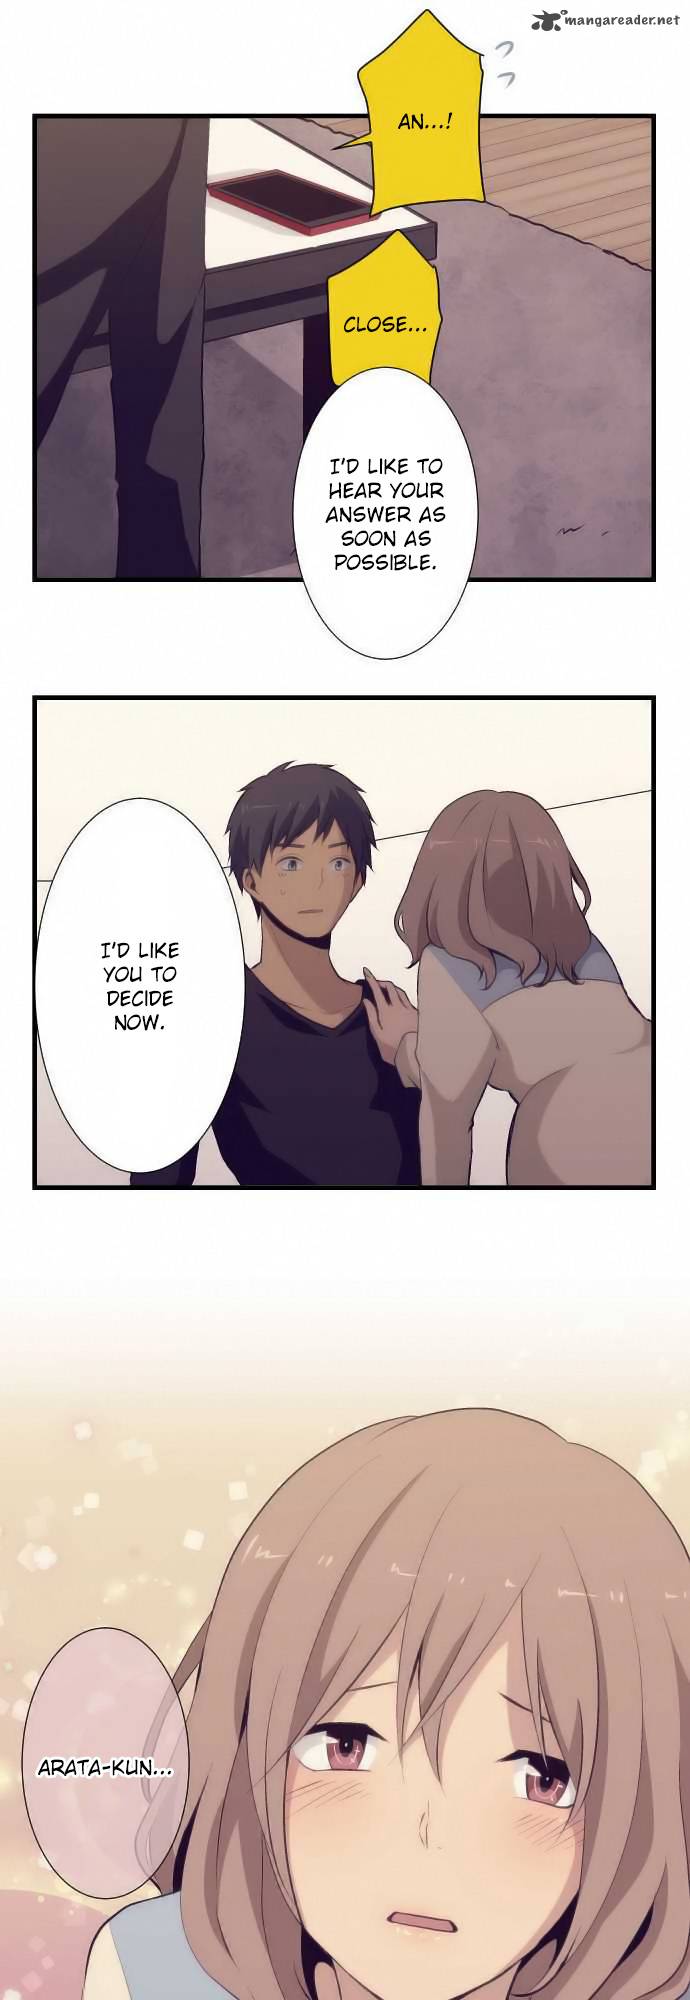 Relife 51 15